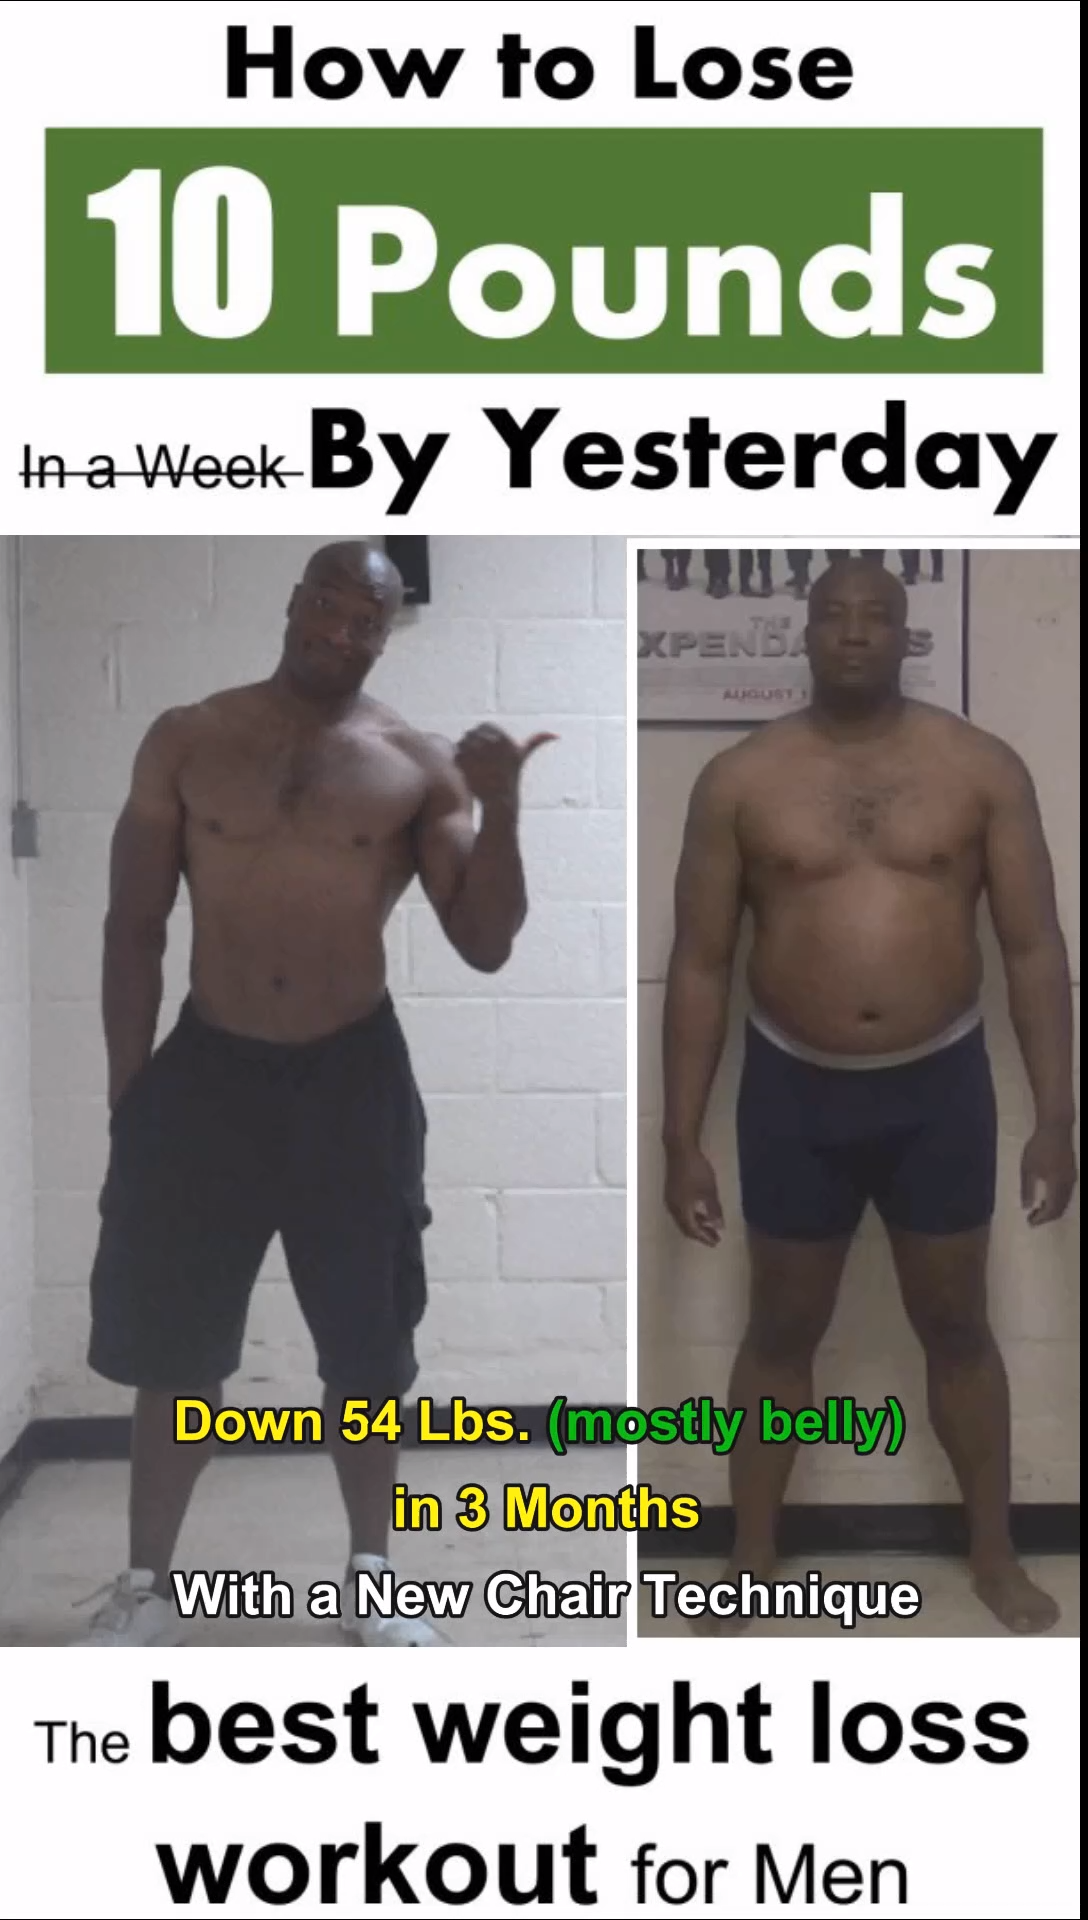 the Best Weight Loss Workout for Men - Lose 10 Pounds in a Week - the Best Weight Loss Workout for Men - Lose 10 Pounds in a Week -   15 fitness Men motivation ideas